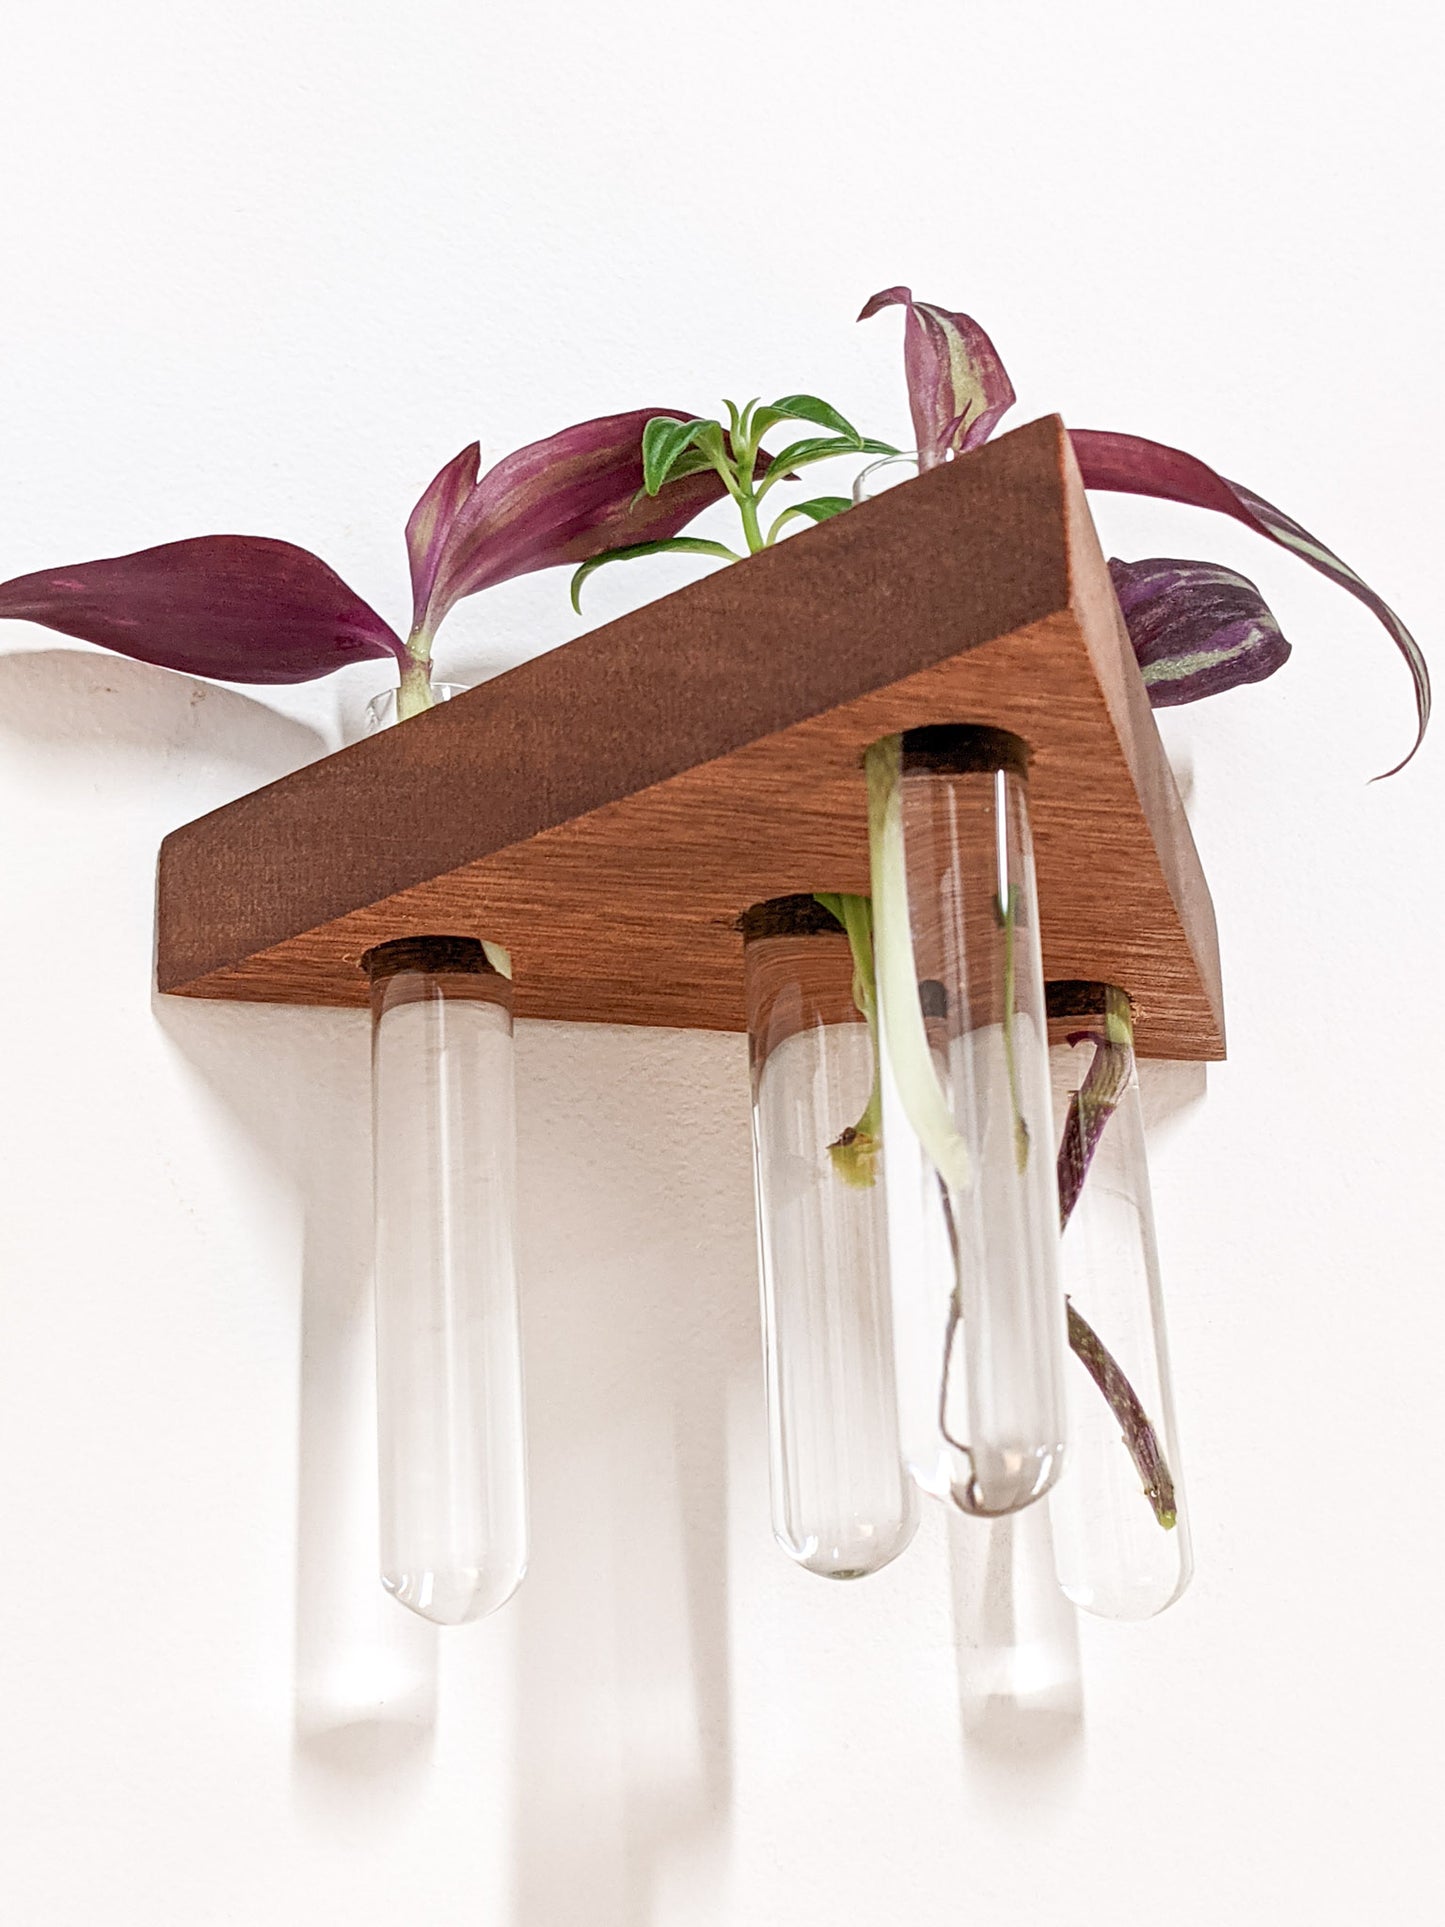 A bottom view of the mahogany triangle propagation shelf. A variety of glass test tubes dangle from the trapezoid floating shelf that is wall-mounted. The vials are filled with various cuttings of plants that peek over the top of the shelf. 